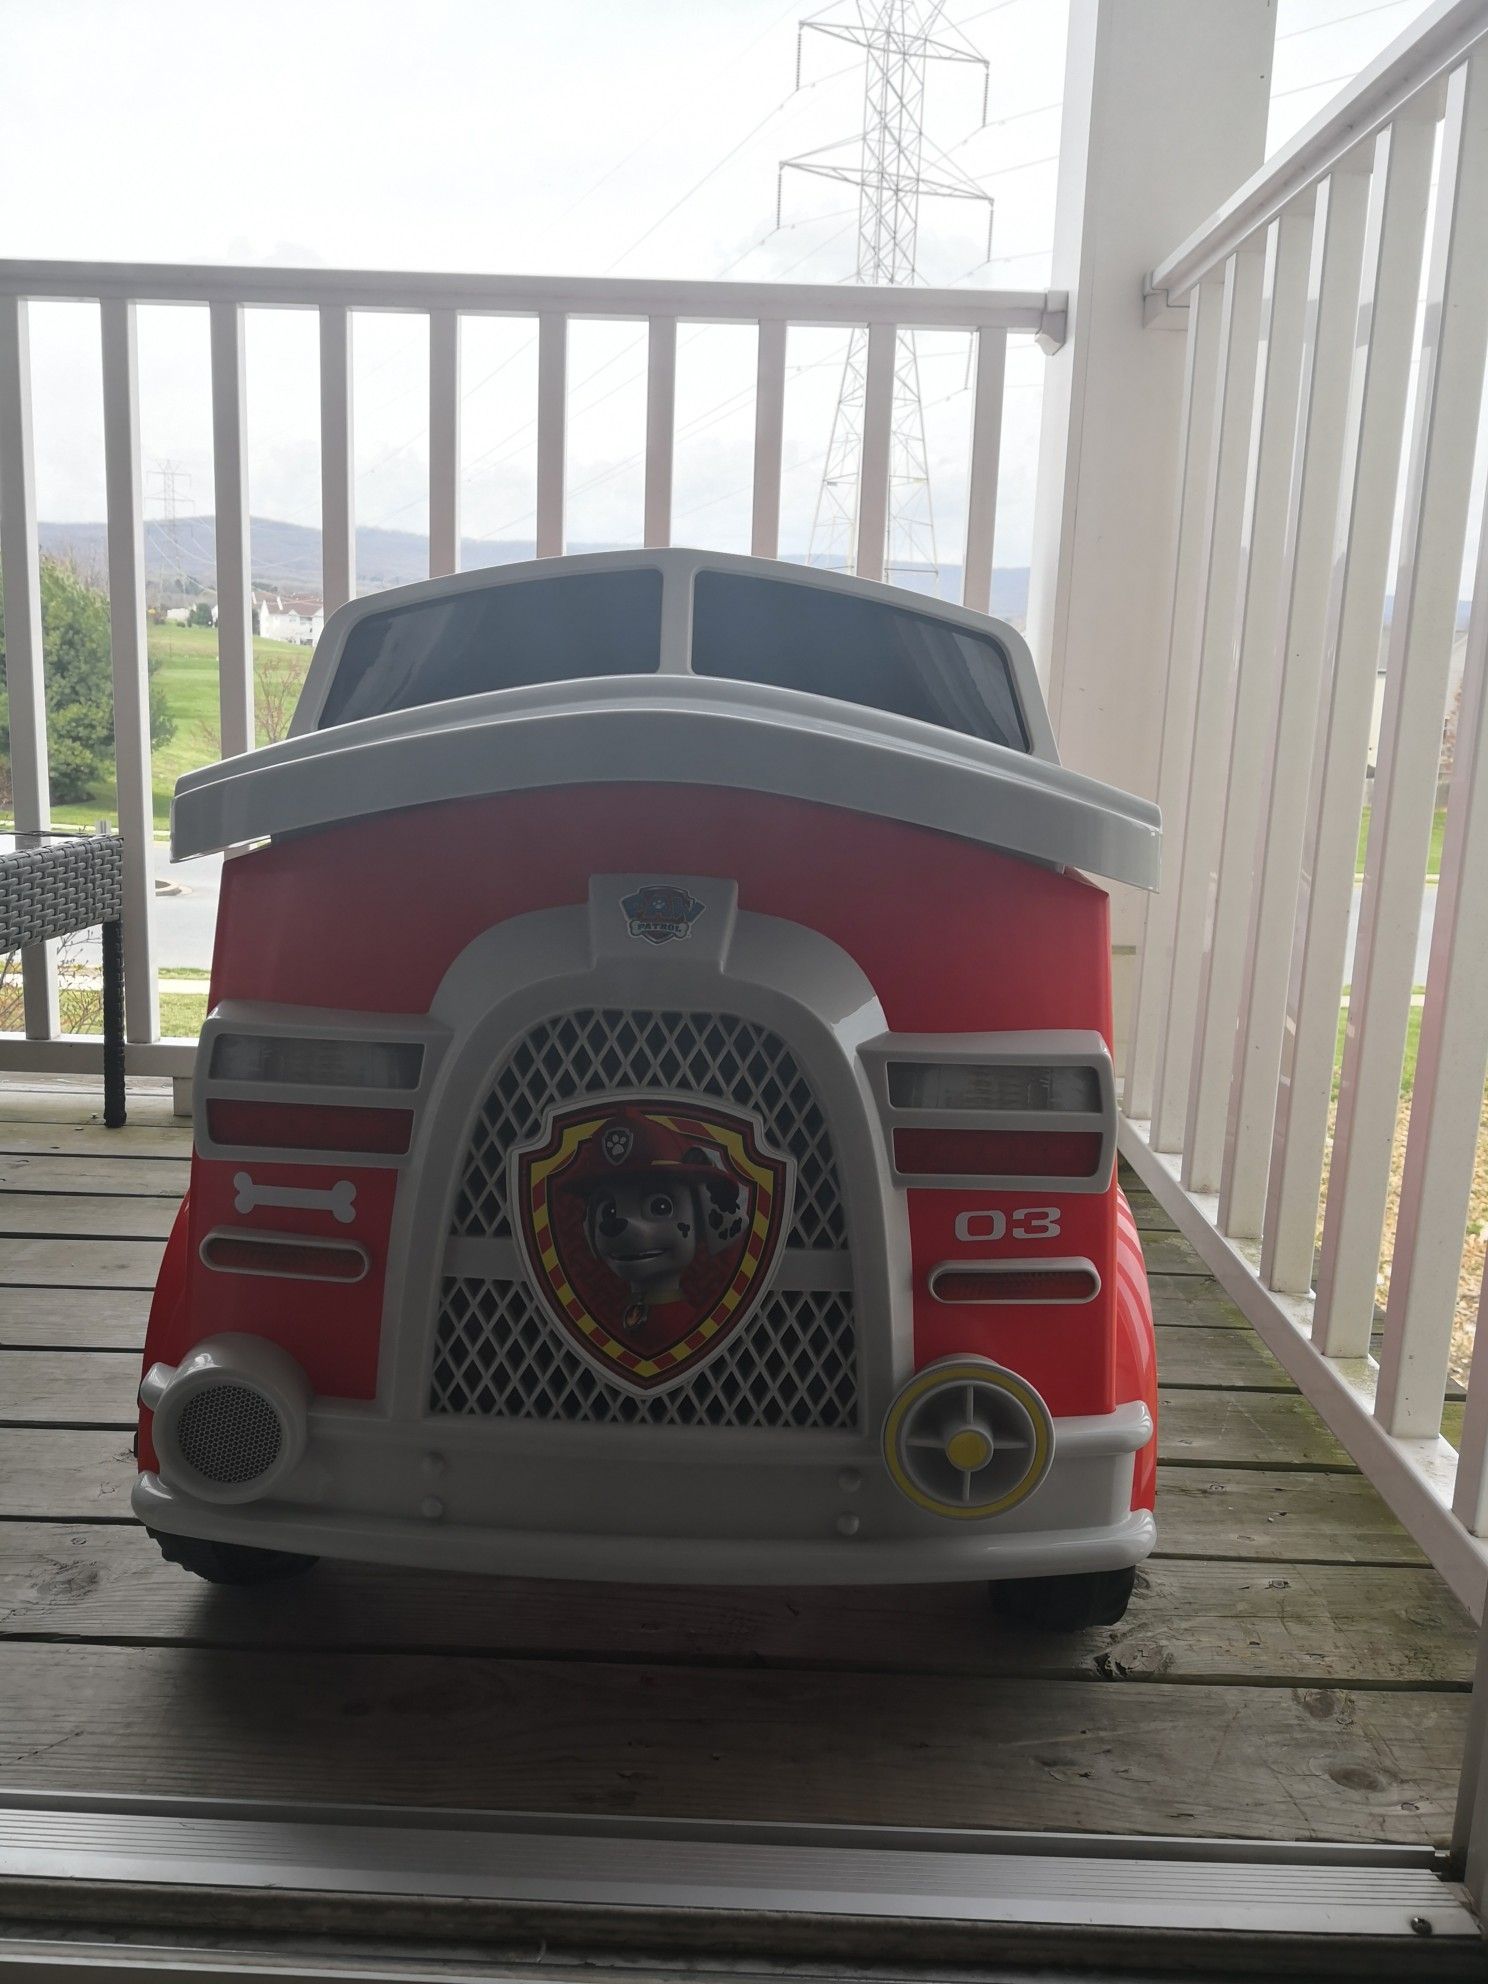 Paw Patrol Fire Truck 6 Volt powered Ride on Toy by Kid Trax, Marshall rescue.